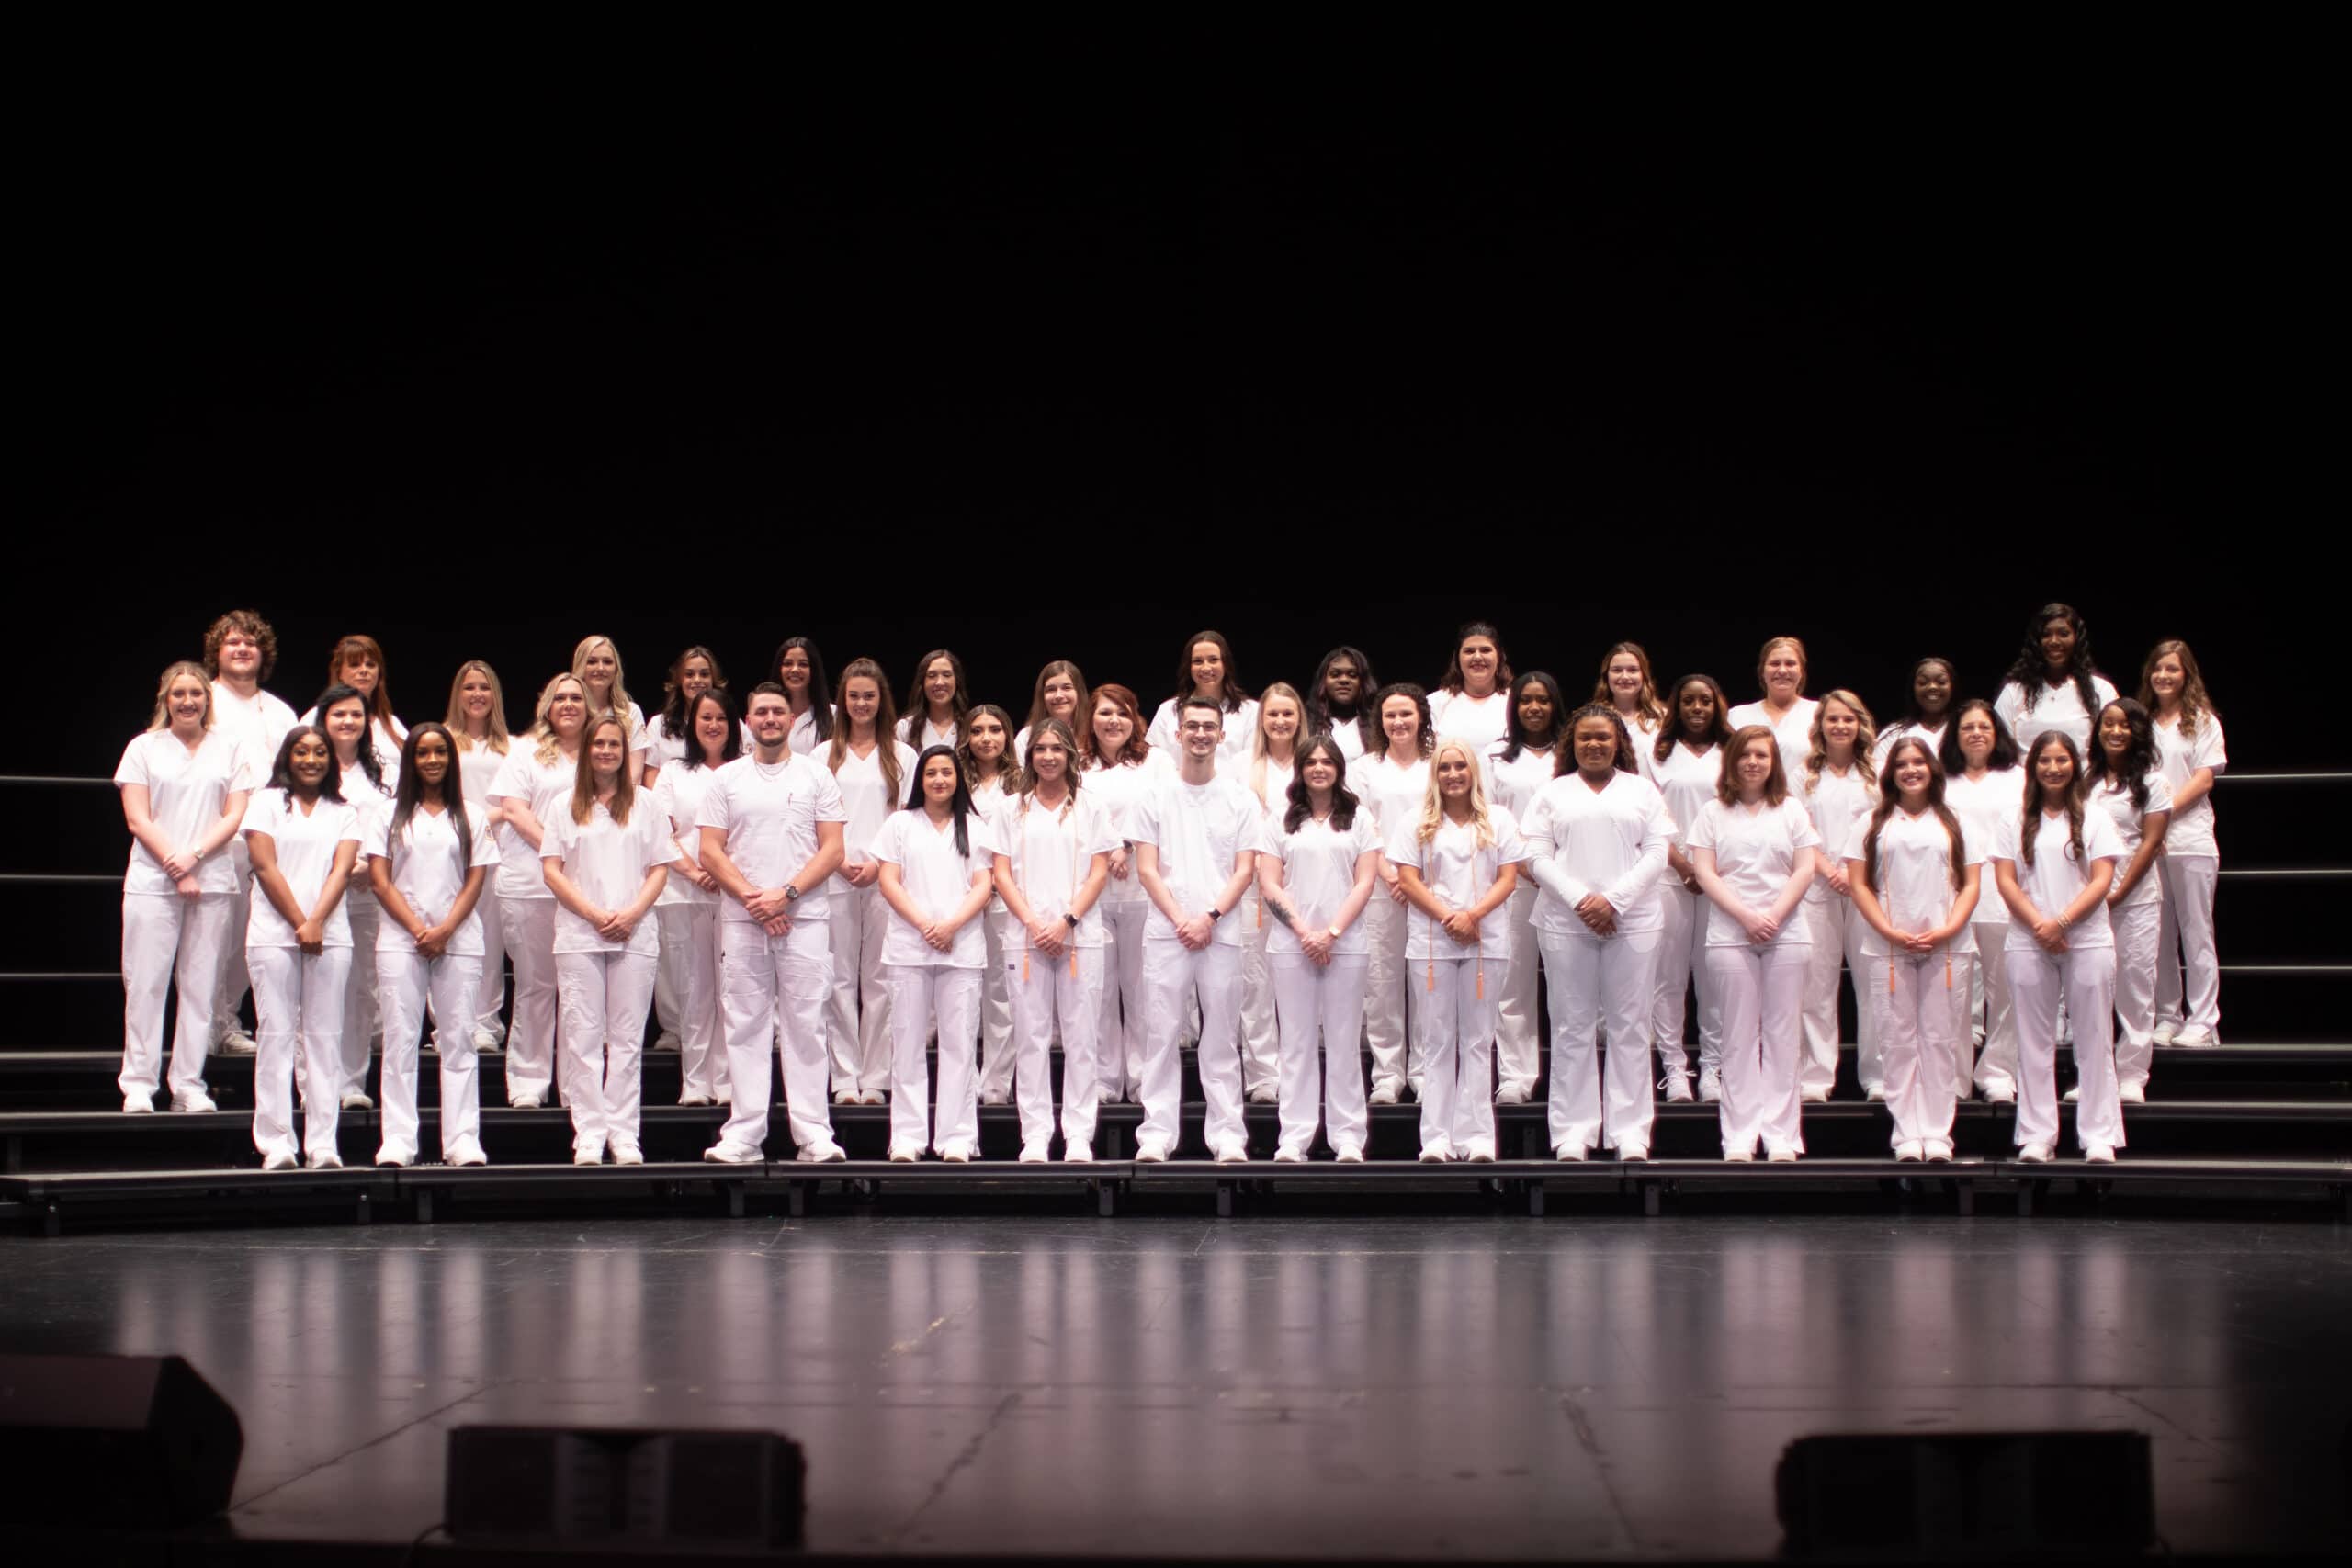 Four rows of men and women in white scrubs on stage for ADN Nursing Program Pinning Sprlng 2022